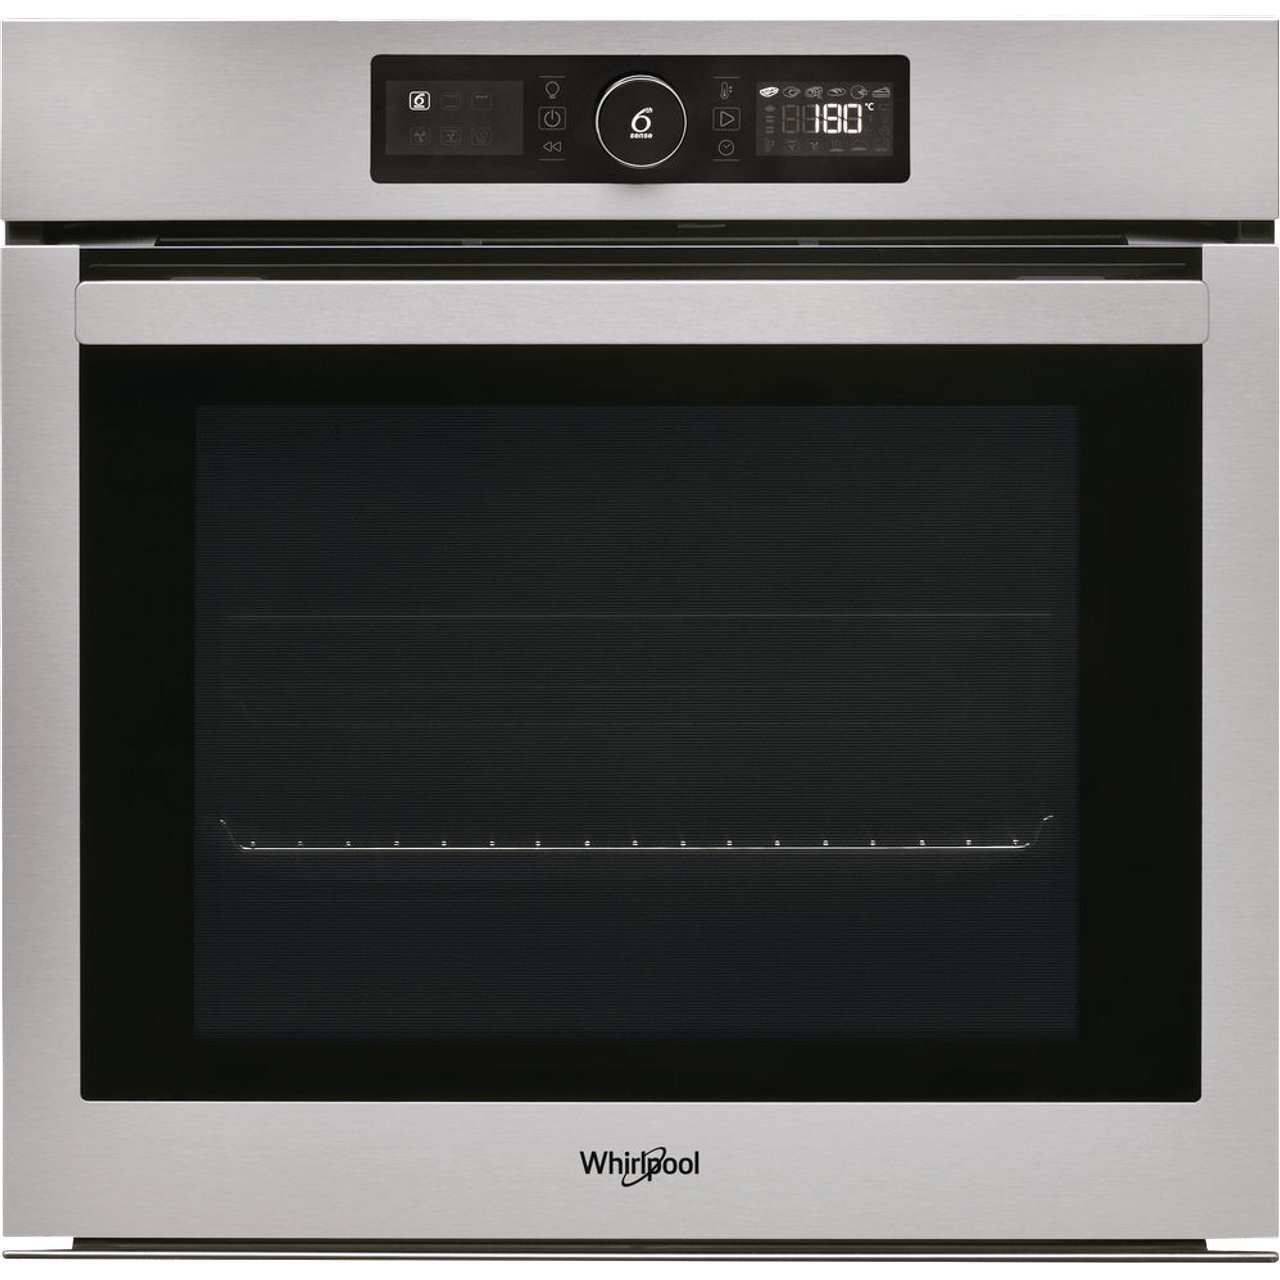 Whirlpool Absolute AKZ96230IX Built In Electric Single Oven Review